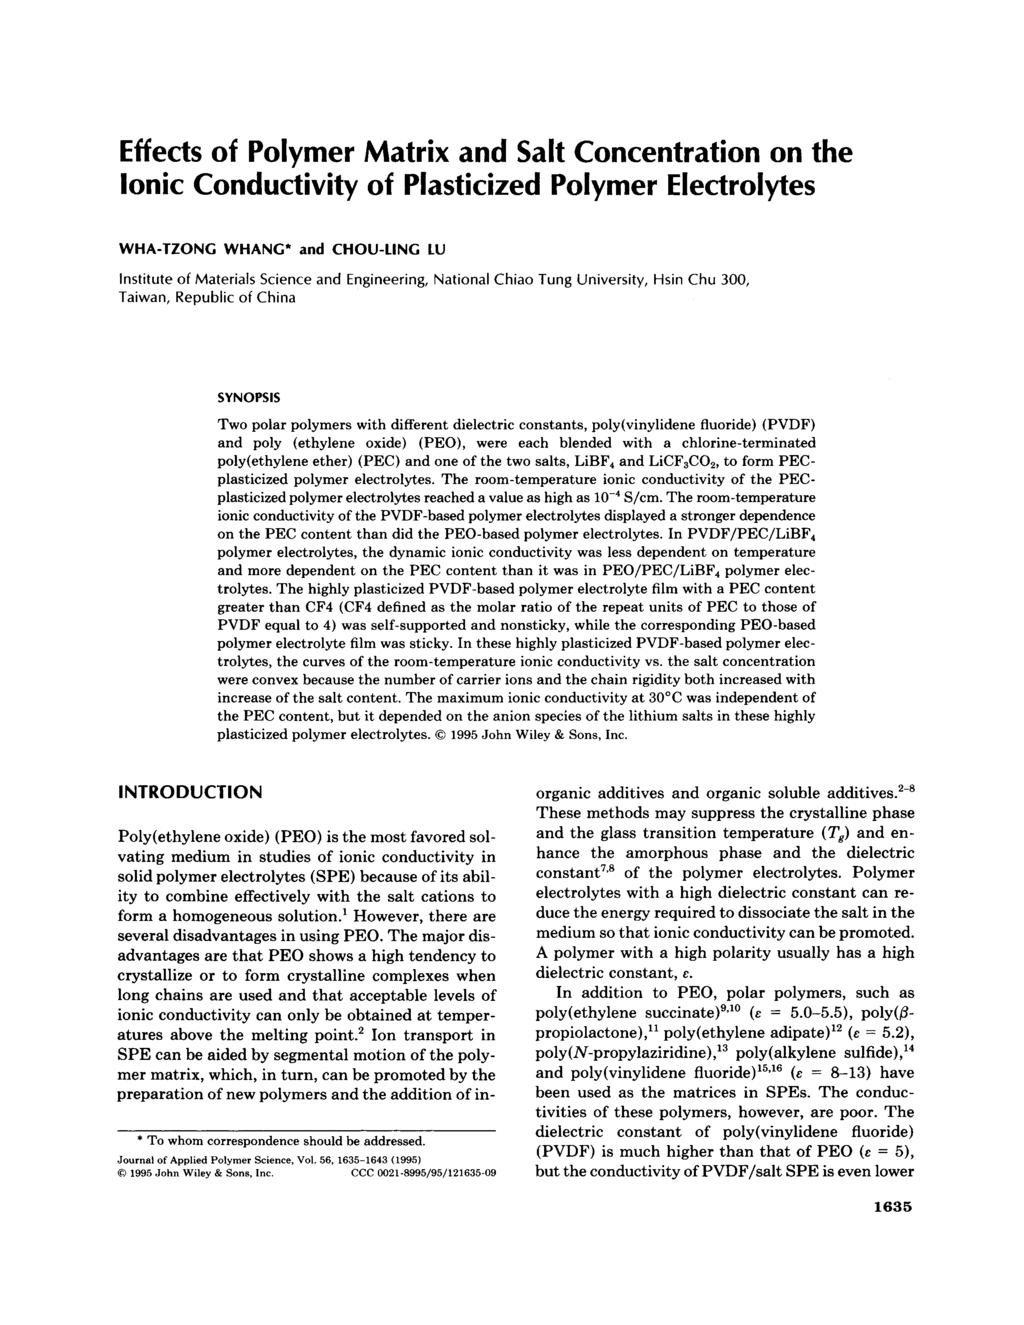 Effects of Polymer Matrix and Salt Concentration on the Ionic Conductivity of Plasticized Polymer Electrolytes WHA-TZONG WHANG* and CHOU-LING LU Institute of Materials Science and Engineering,